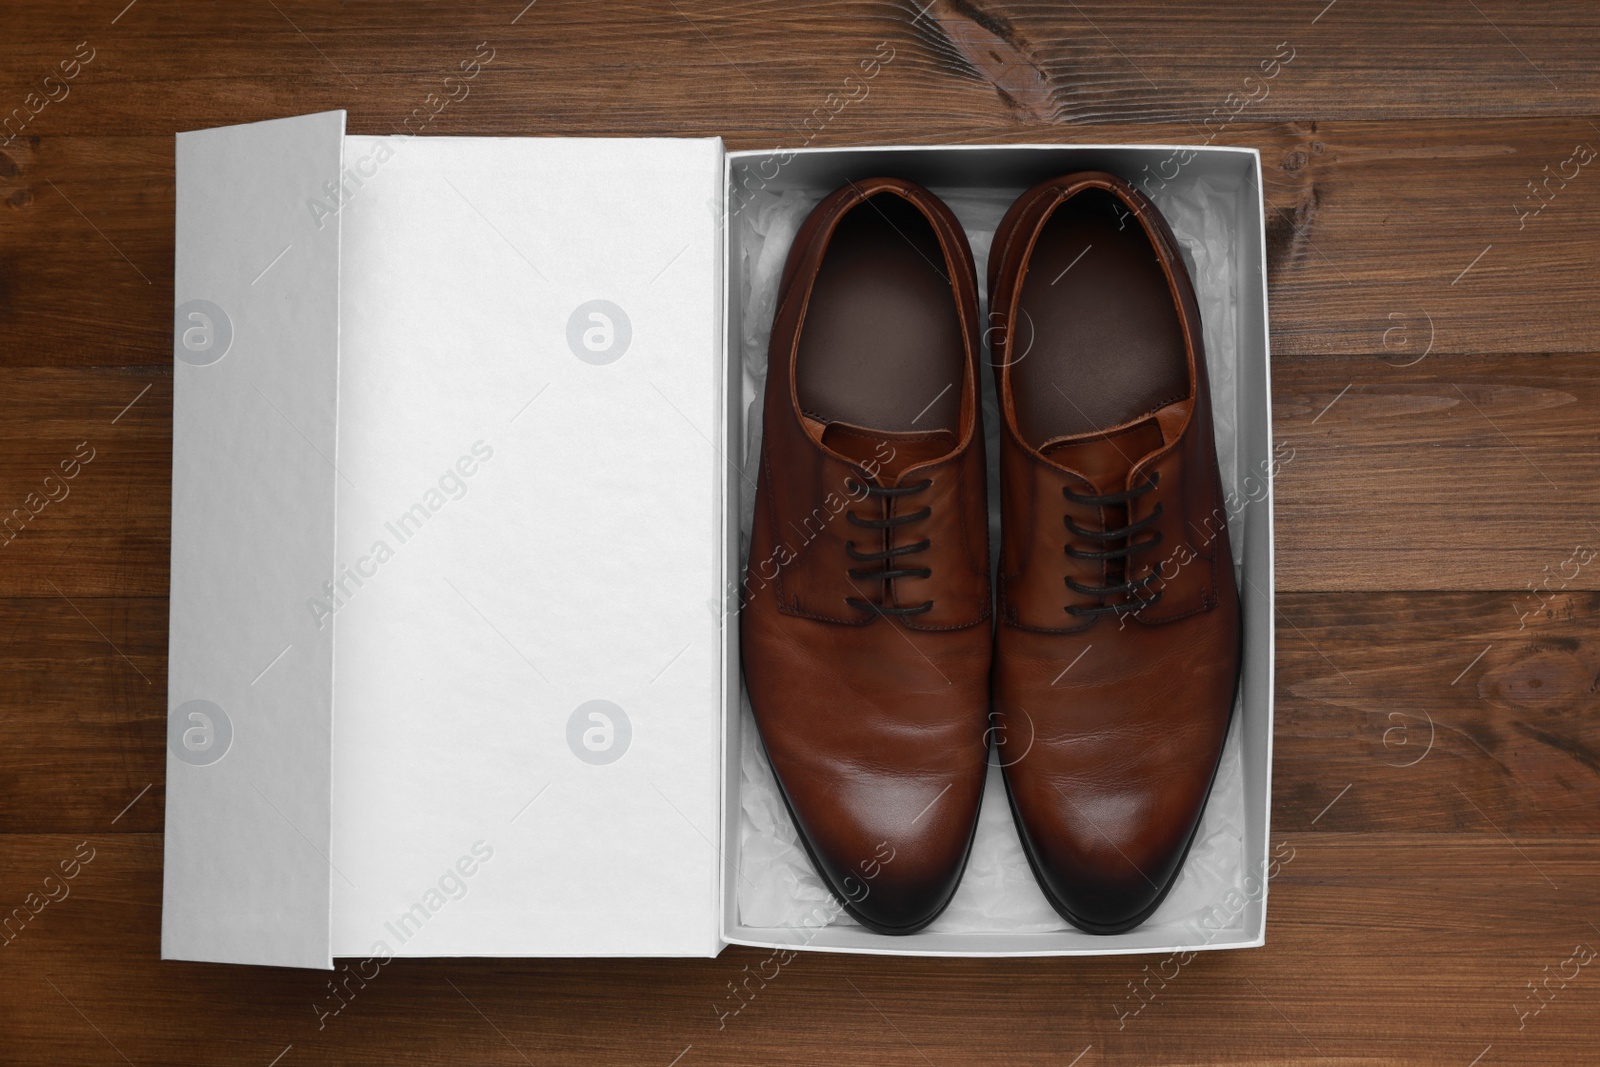 Photo of Pair of stylish leather shoes in white box on wooden background, top view